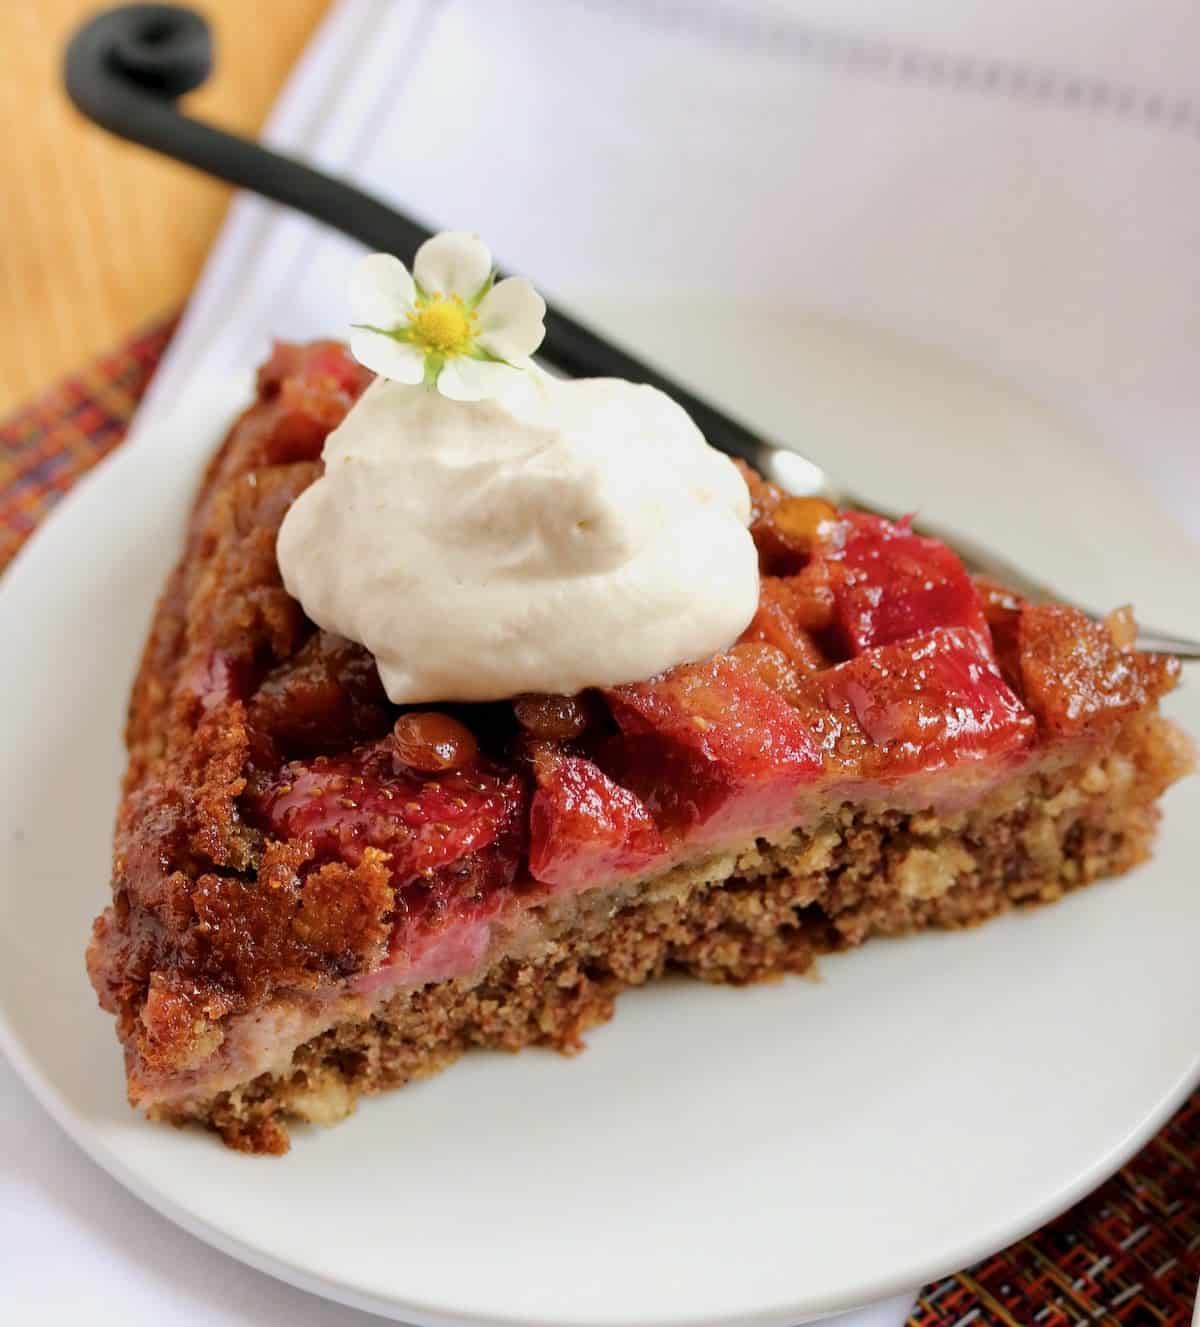 slice of strawberry rhubarb skillet cake with whipped cream is one of my winning recipes